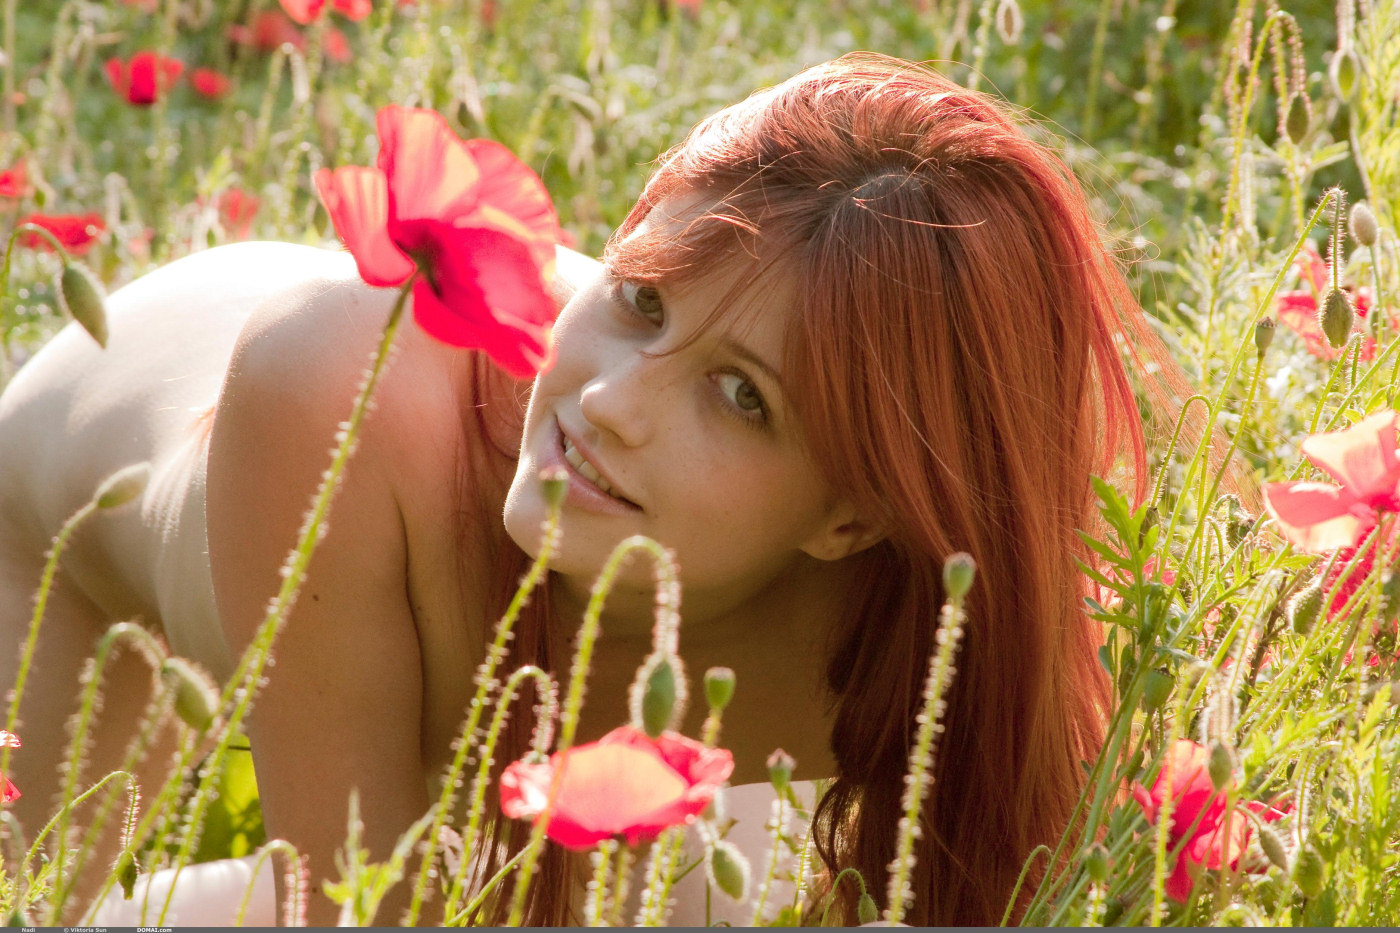 Exciting perfect body nude young tall Nadi is in the field among red flowers - 62-Domai_Nadi-2_Nadi_high_0062 from Domai